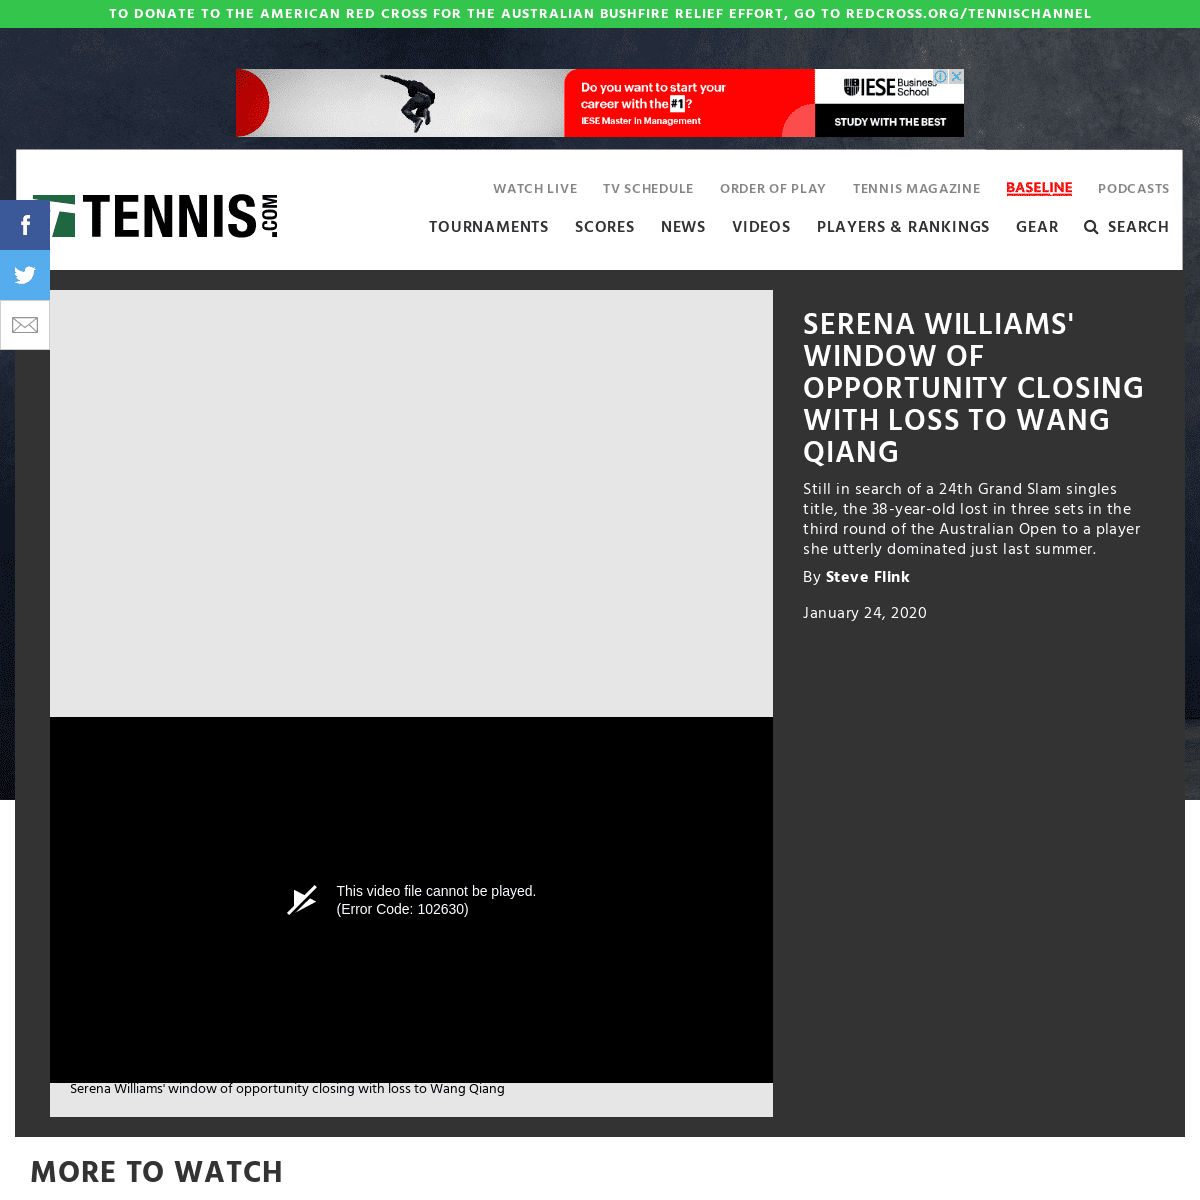 A complete backup of www.tennis.com/pro-game/2020/01/serena-williams-wang-qiang-2020-australian-open-third-round/87059/